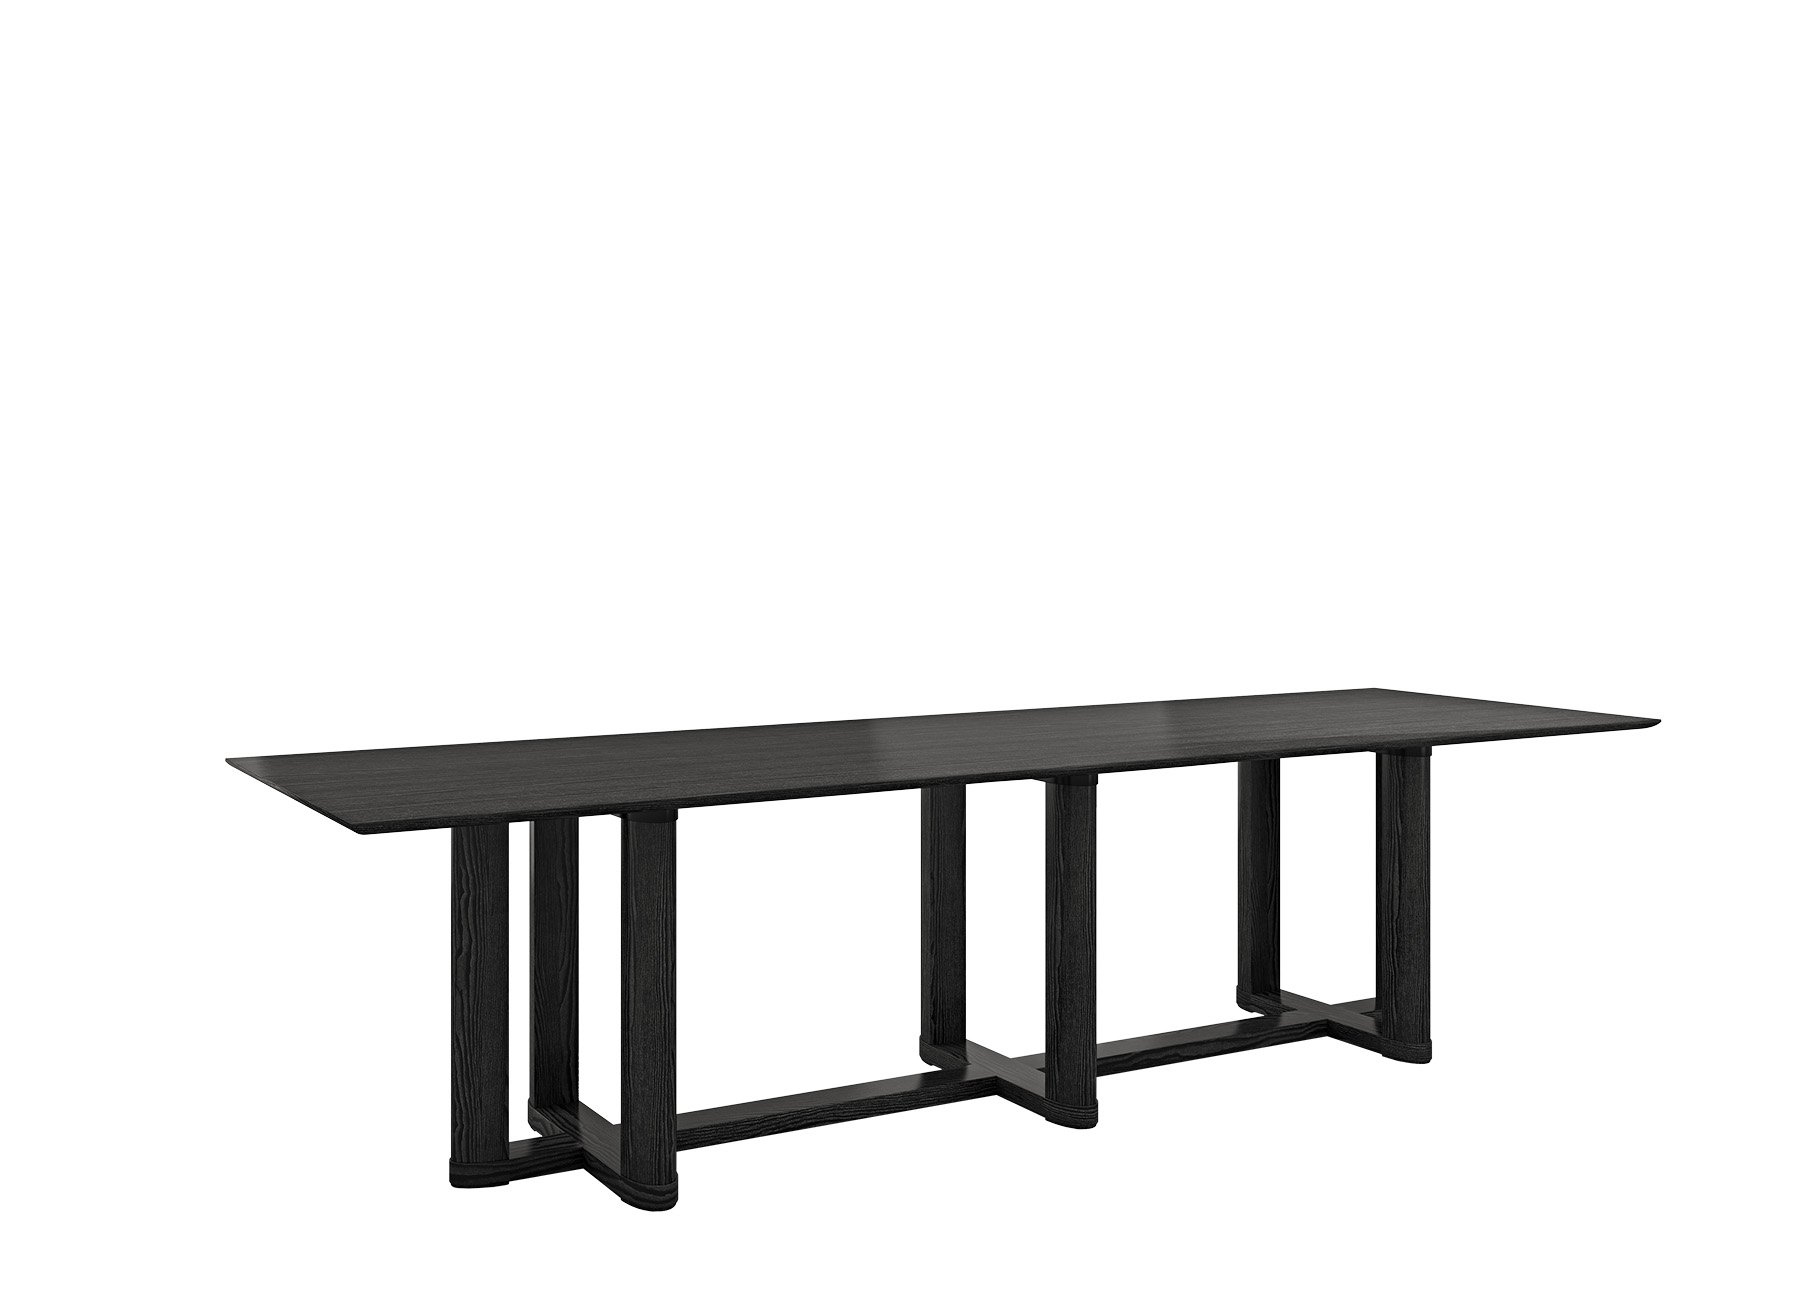 HULL DINING TABLE 120" X 38" - $10,290